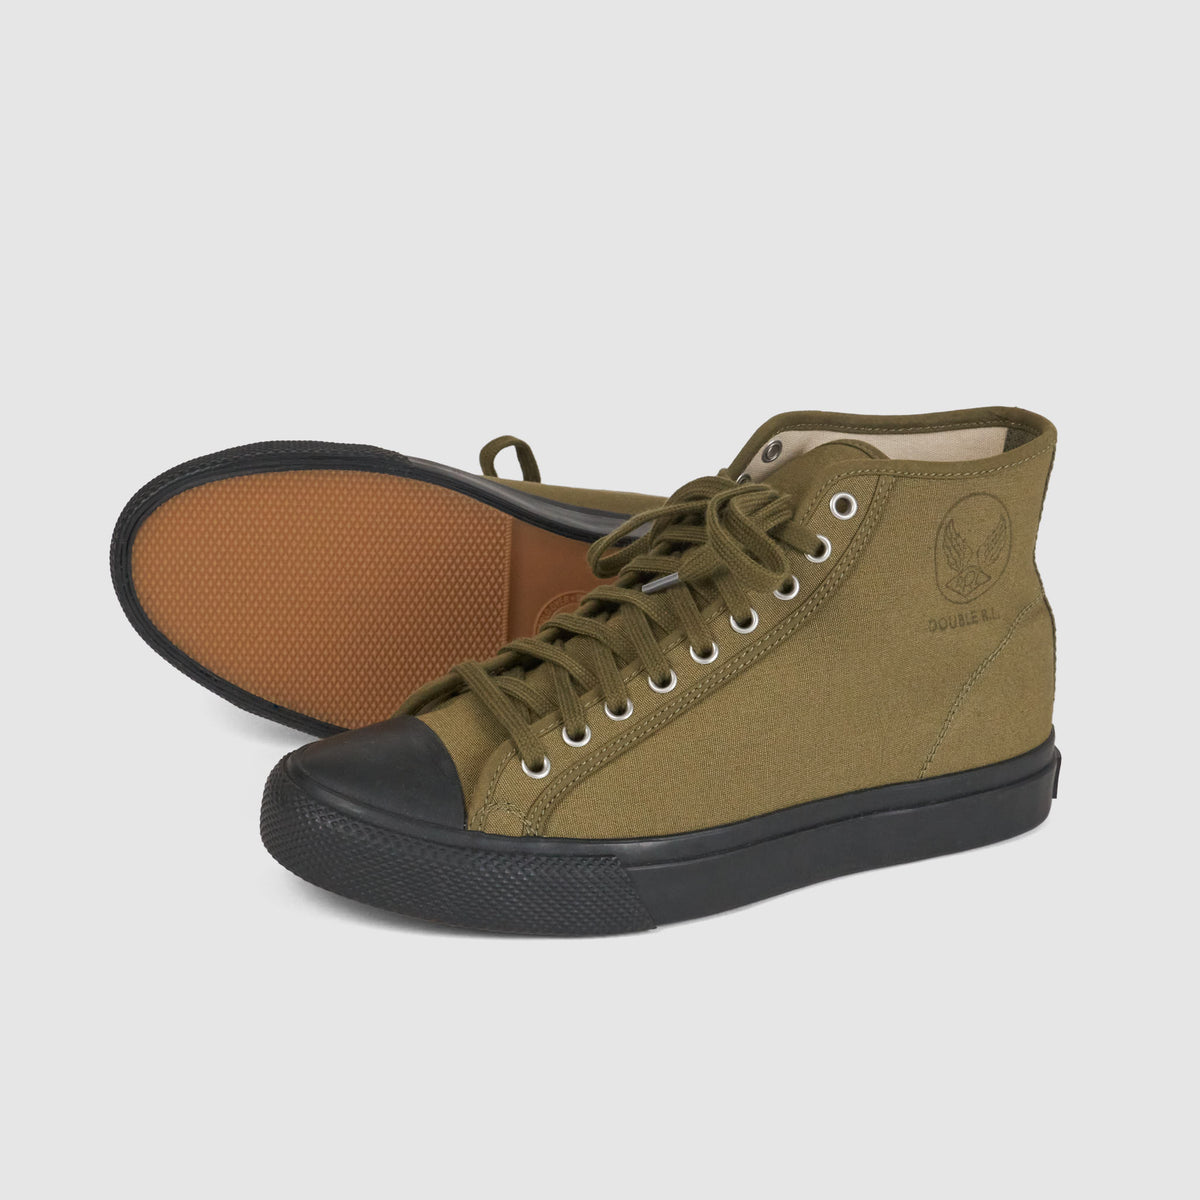 Double RL Military Style Sneaker